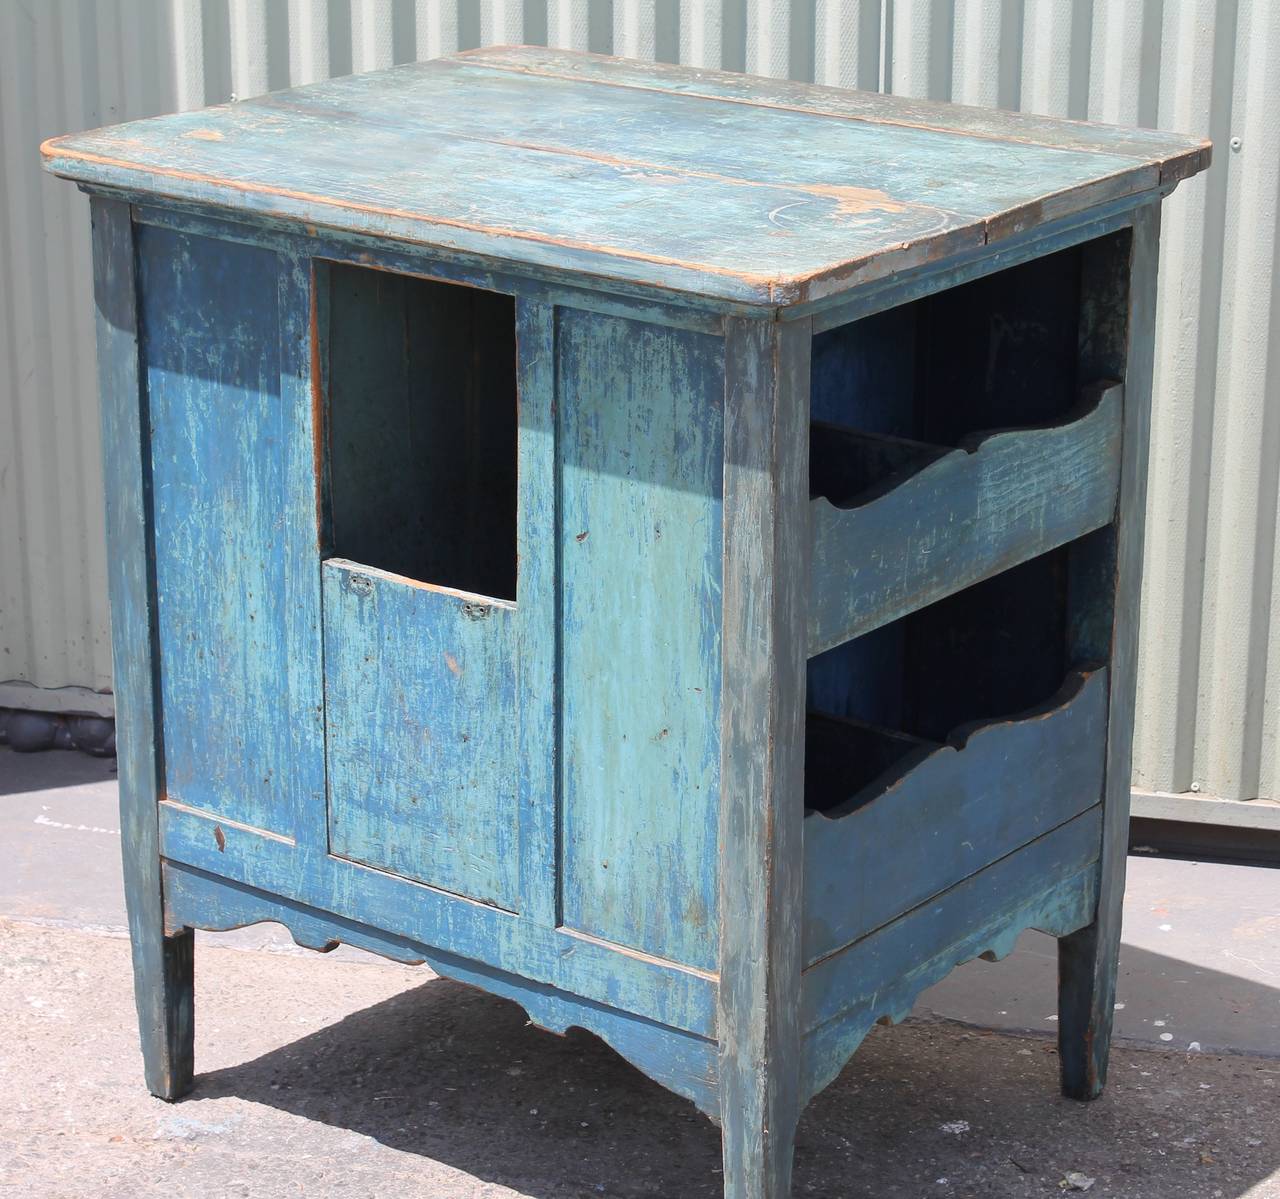 This multi functional table has many different compartments and shelving built with in the cabinet. Makes a great side or end table. The condition is good with wear consistent from age and use. This 19thc cabinet is in a original blue painted